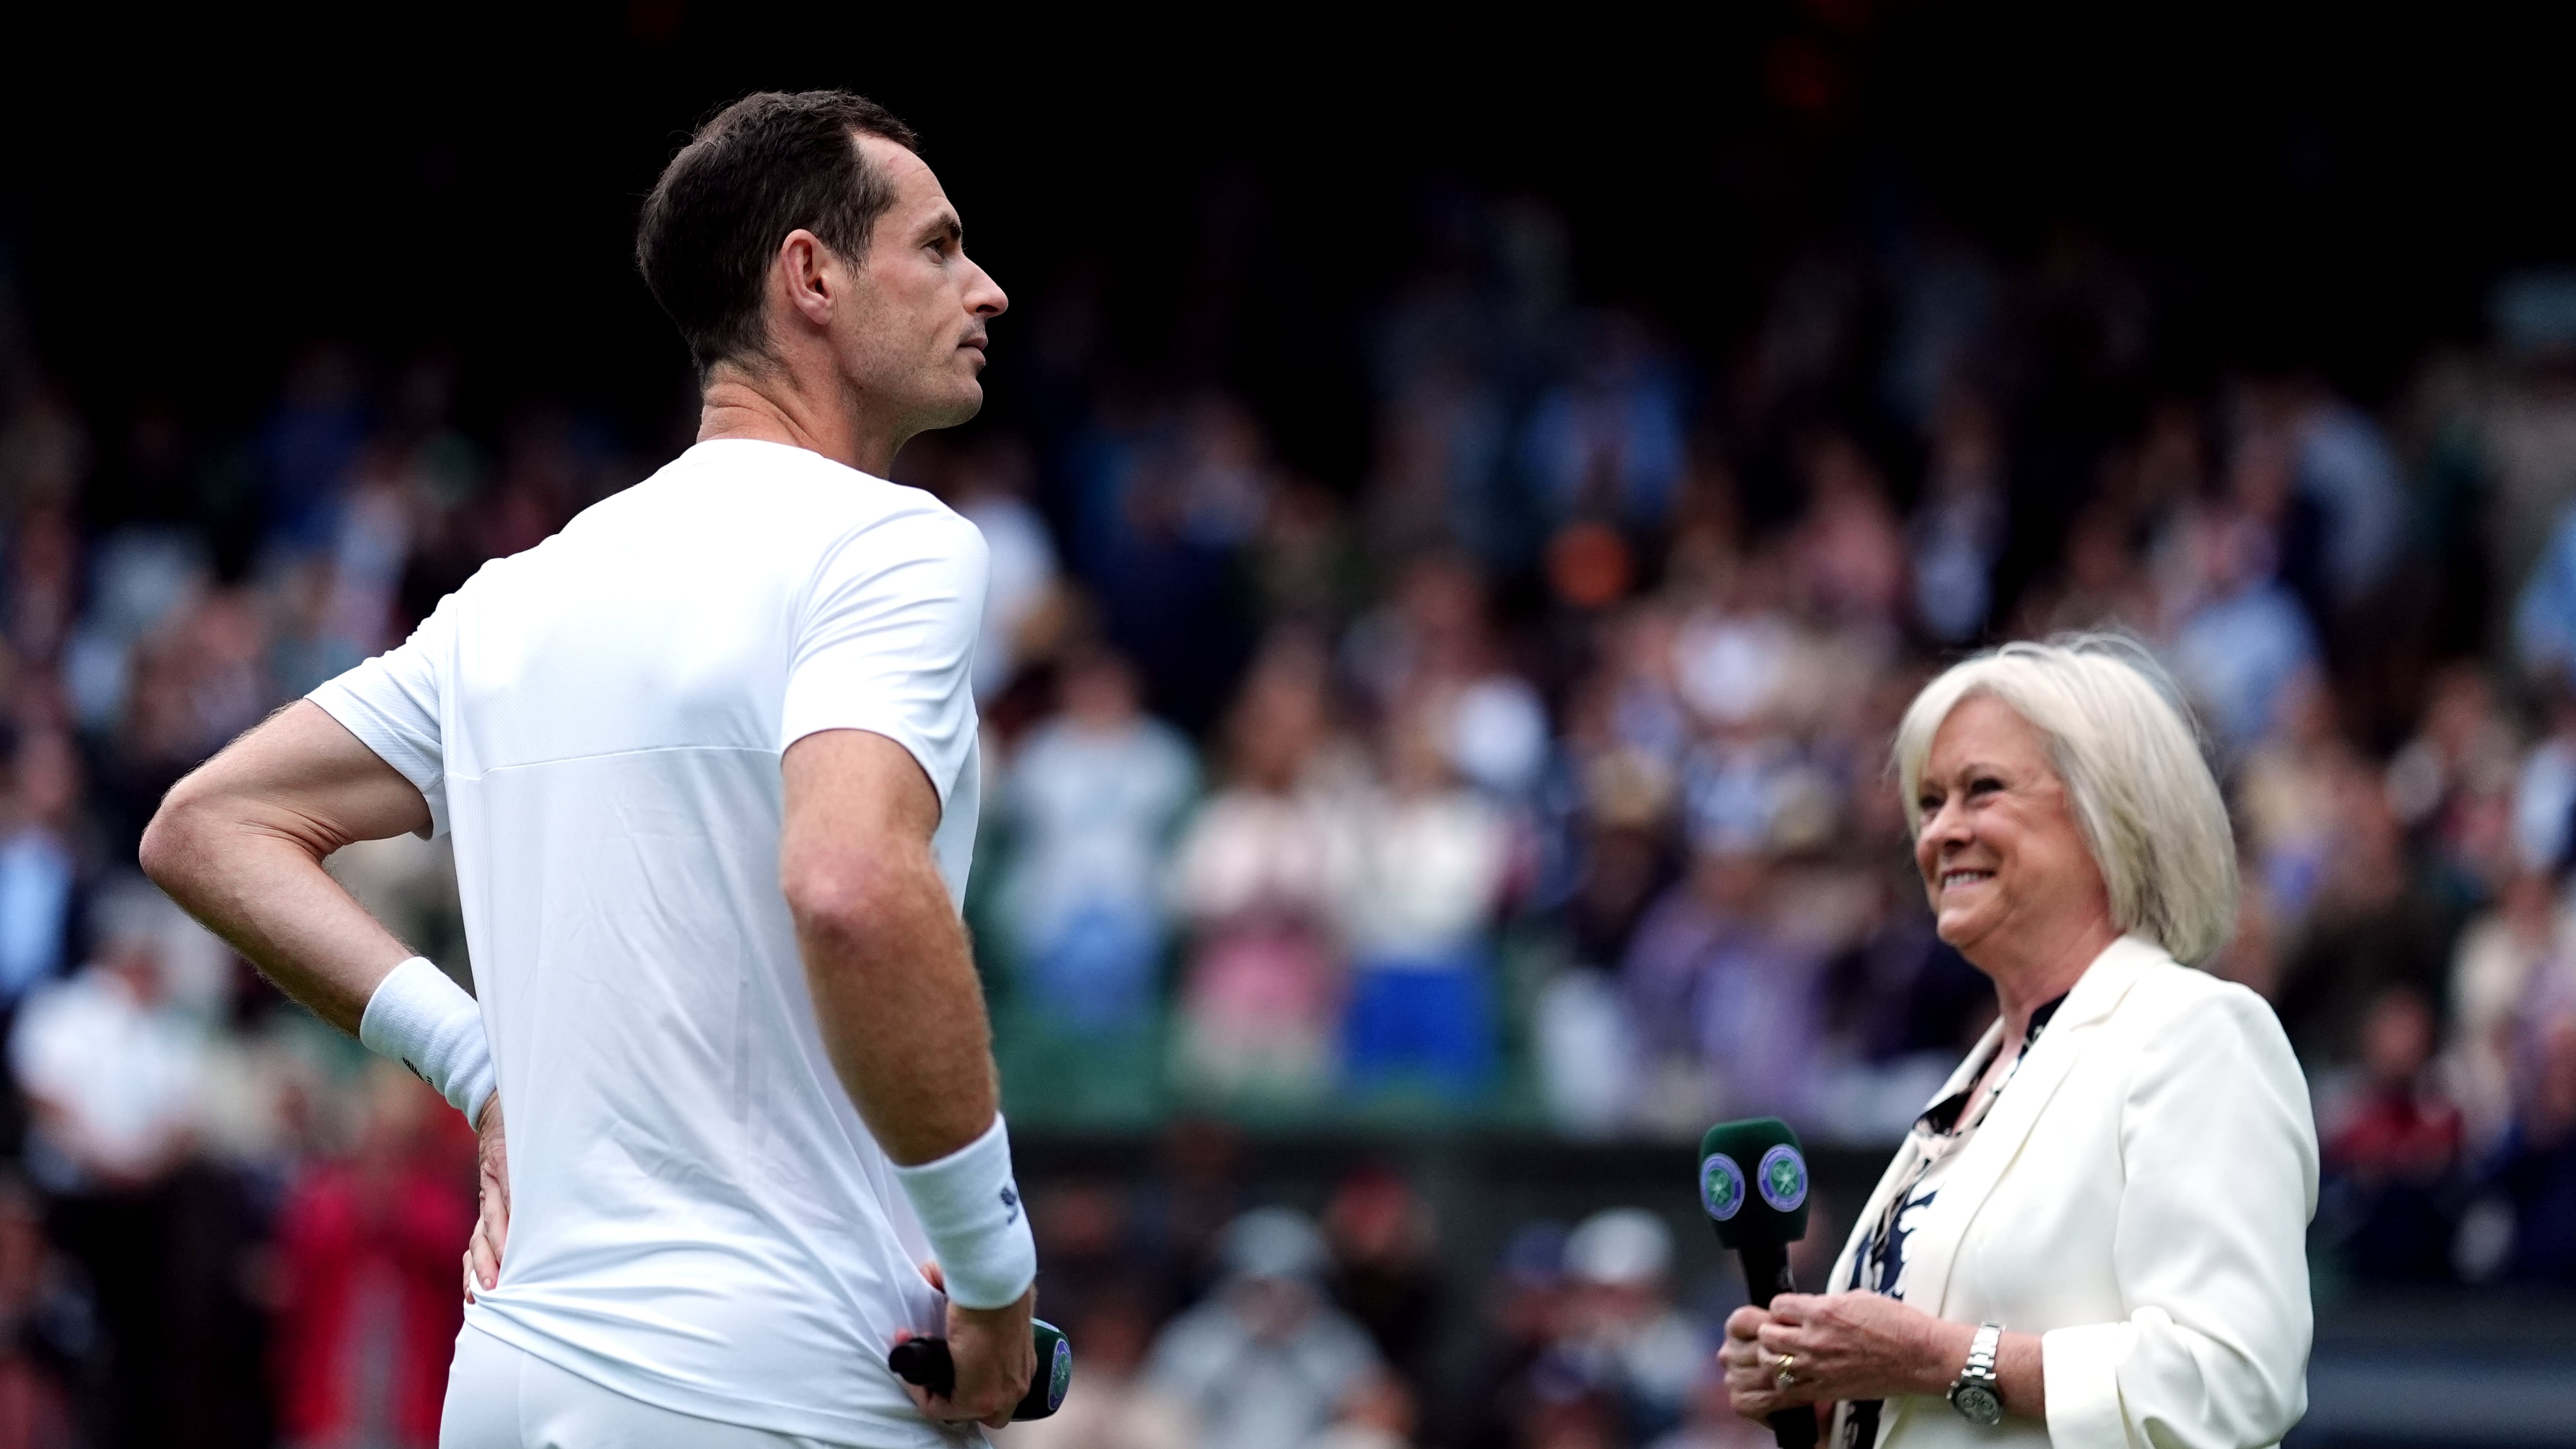 Andy Murray with Sue Barker at Wimbledon after his men’s doubles match with his brother Jamie